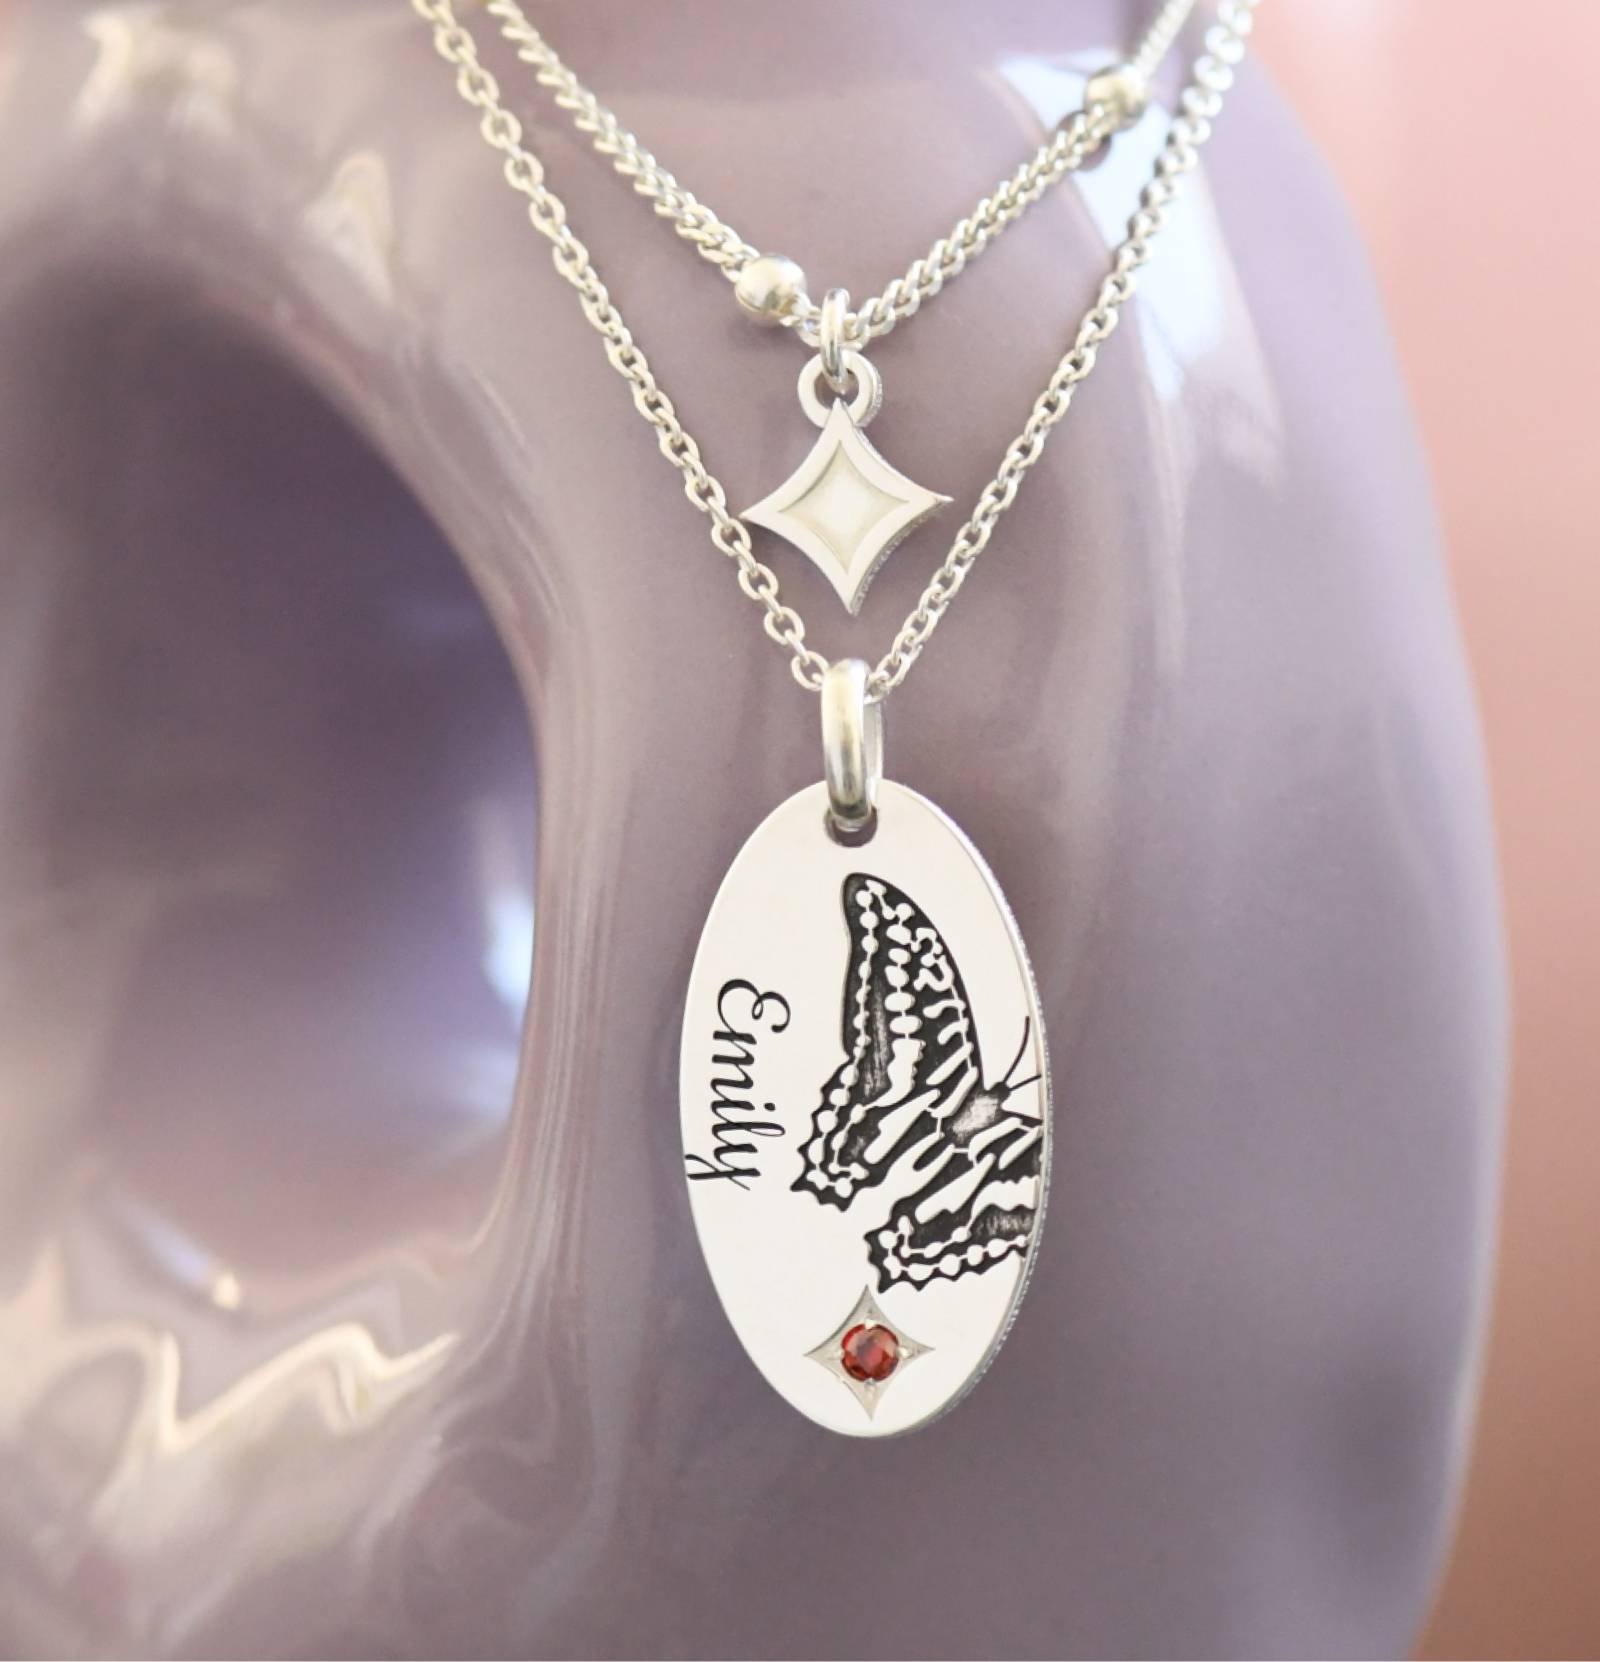 Butterfly Pendant Necklaces: